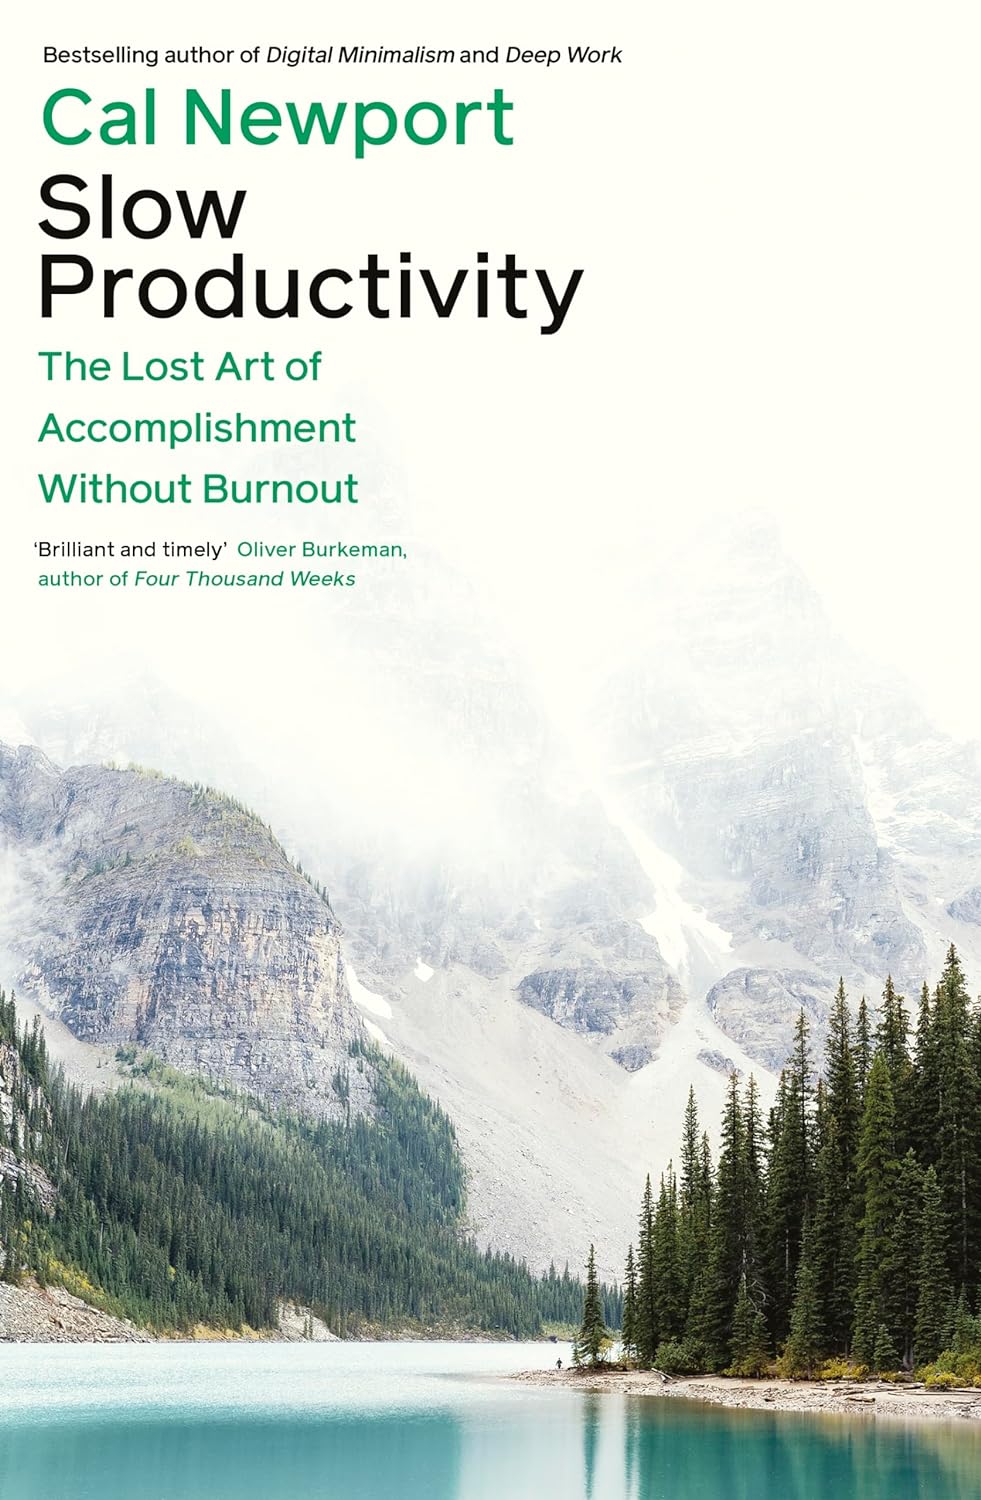 Slow Productivity: The Lost Art of Accomplishment Without Burnout image